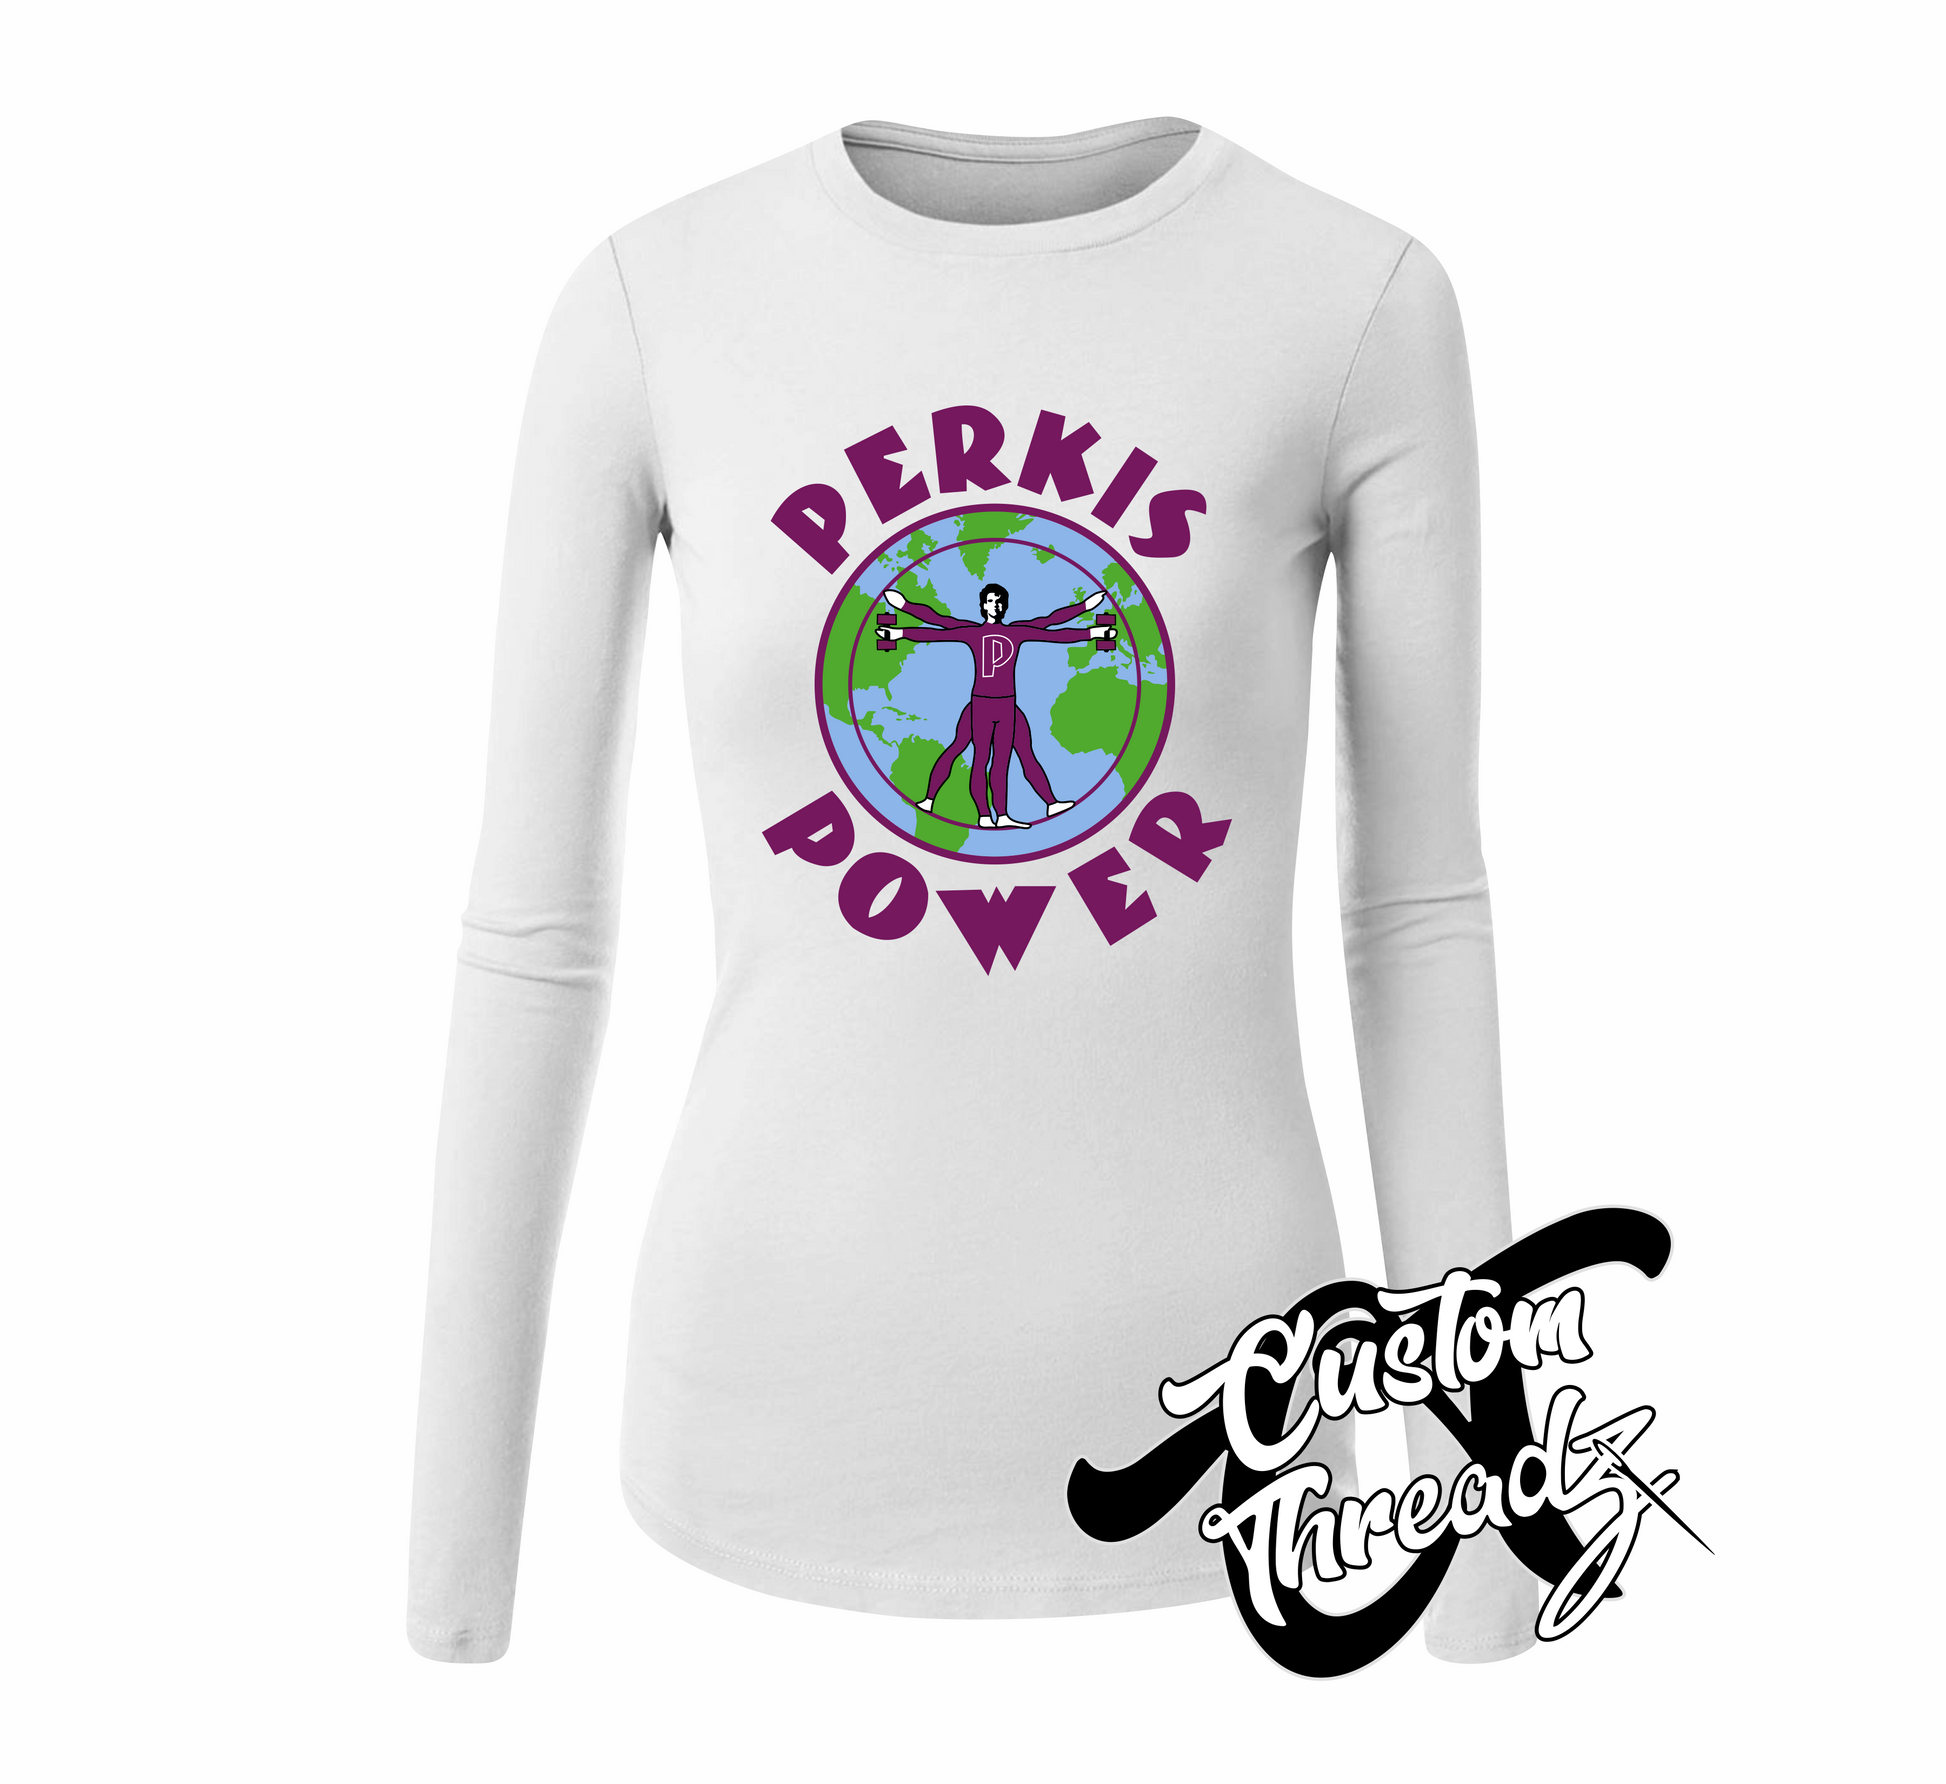 white womens long sleeve tee with perkis power heavyweights DTG printed design